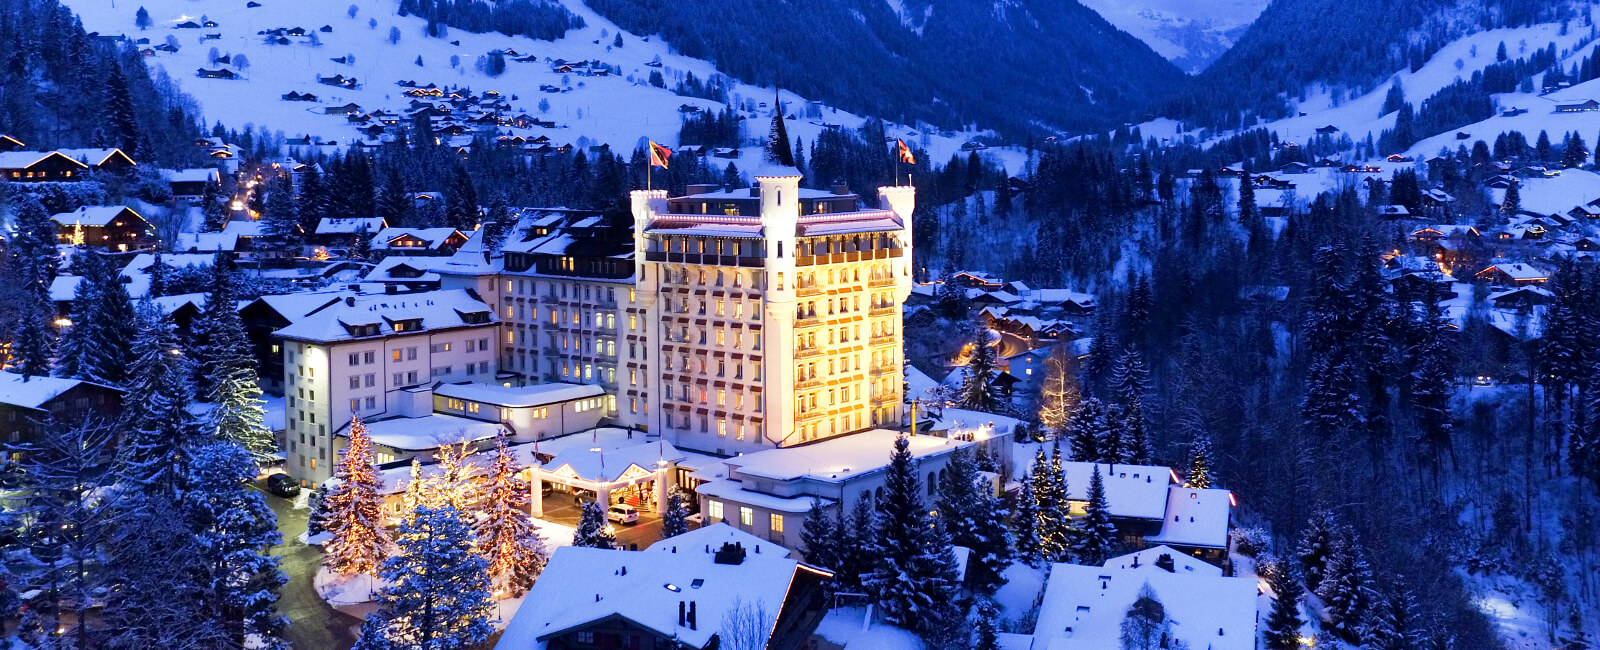 Gstaad Palace Hotel • Pupil&Co